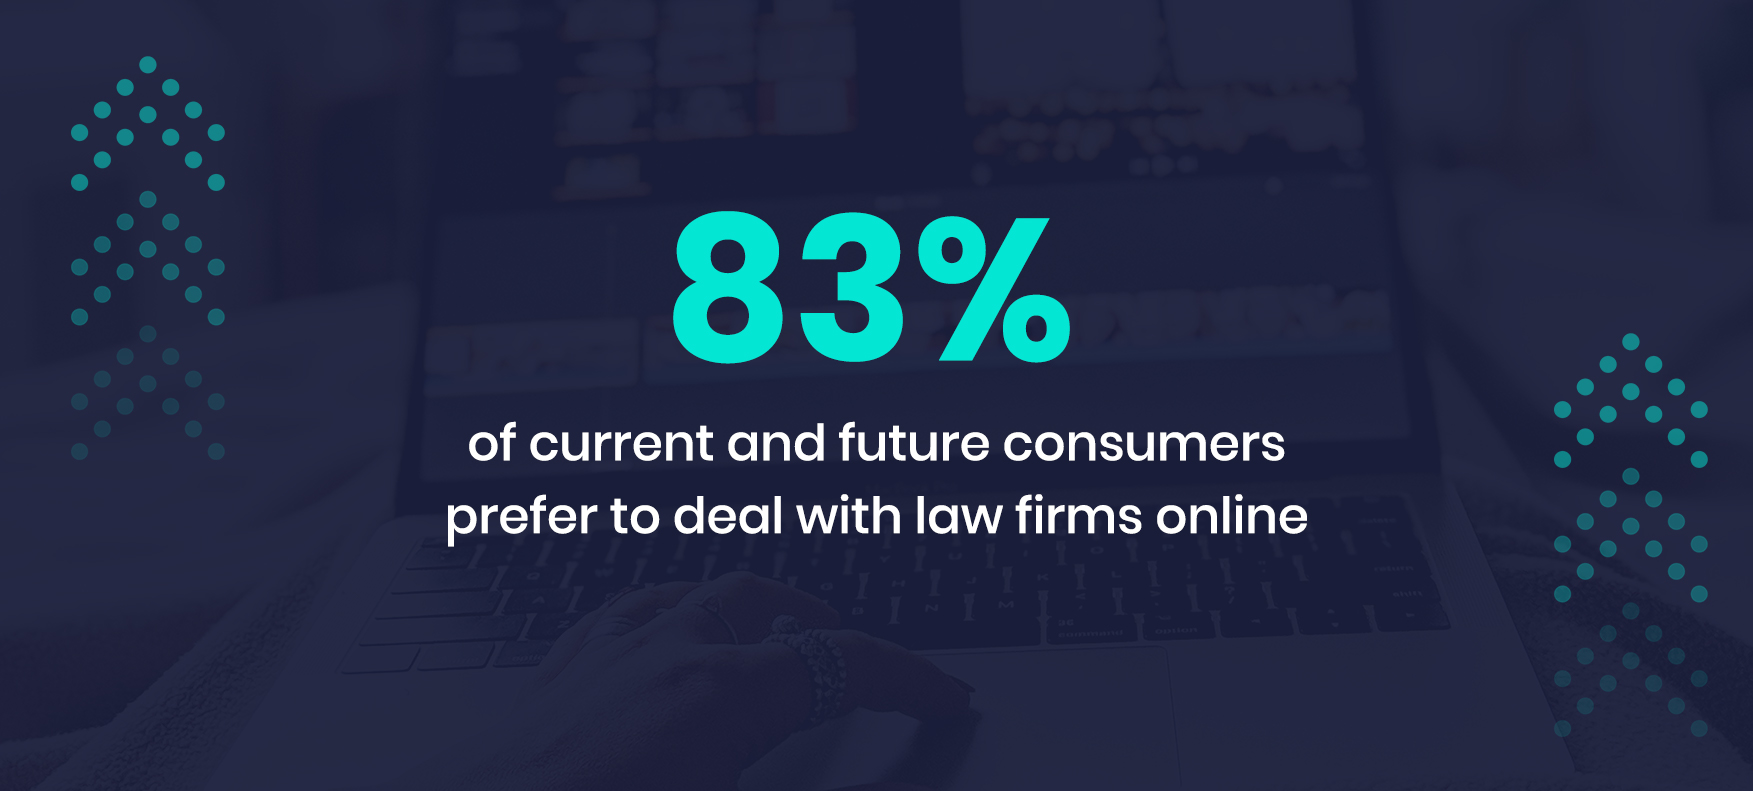 83% of current and future consumers prefer to deal with law firms online